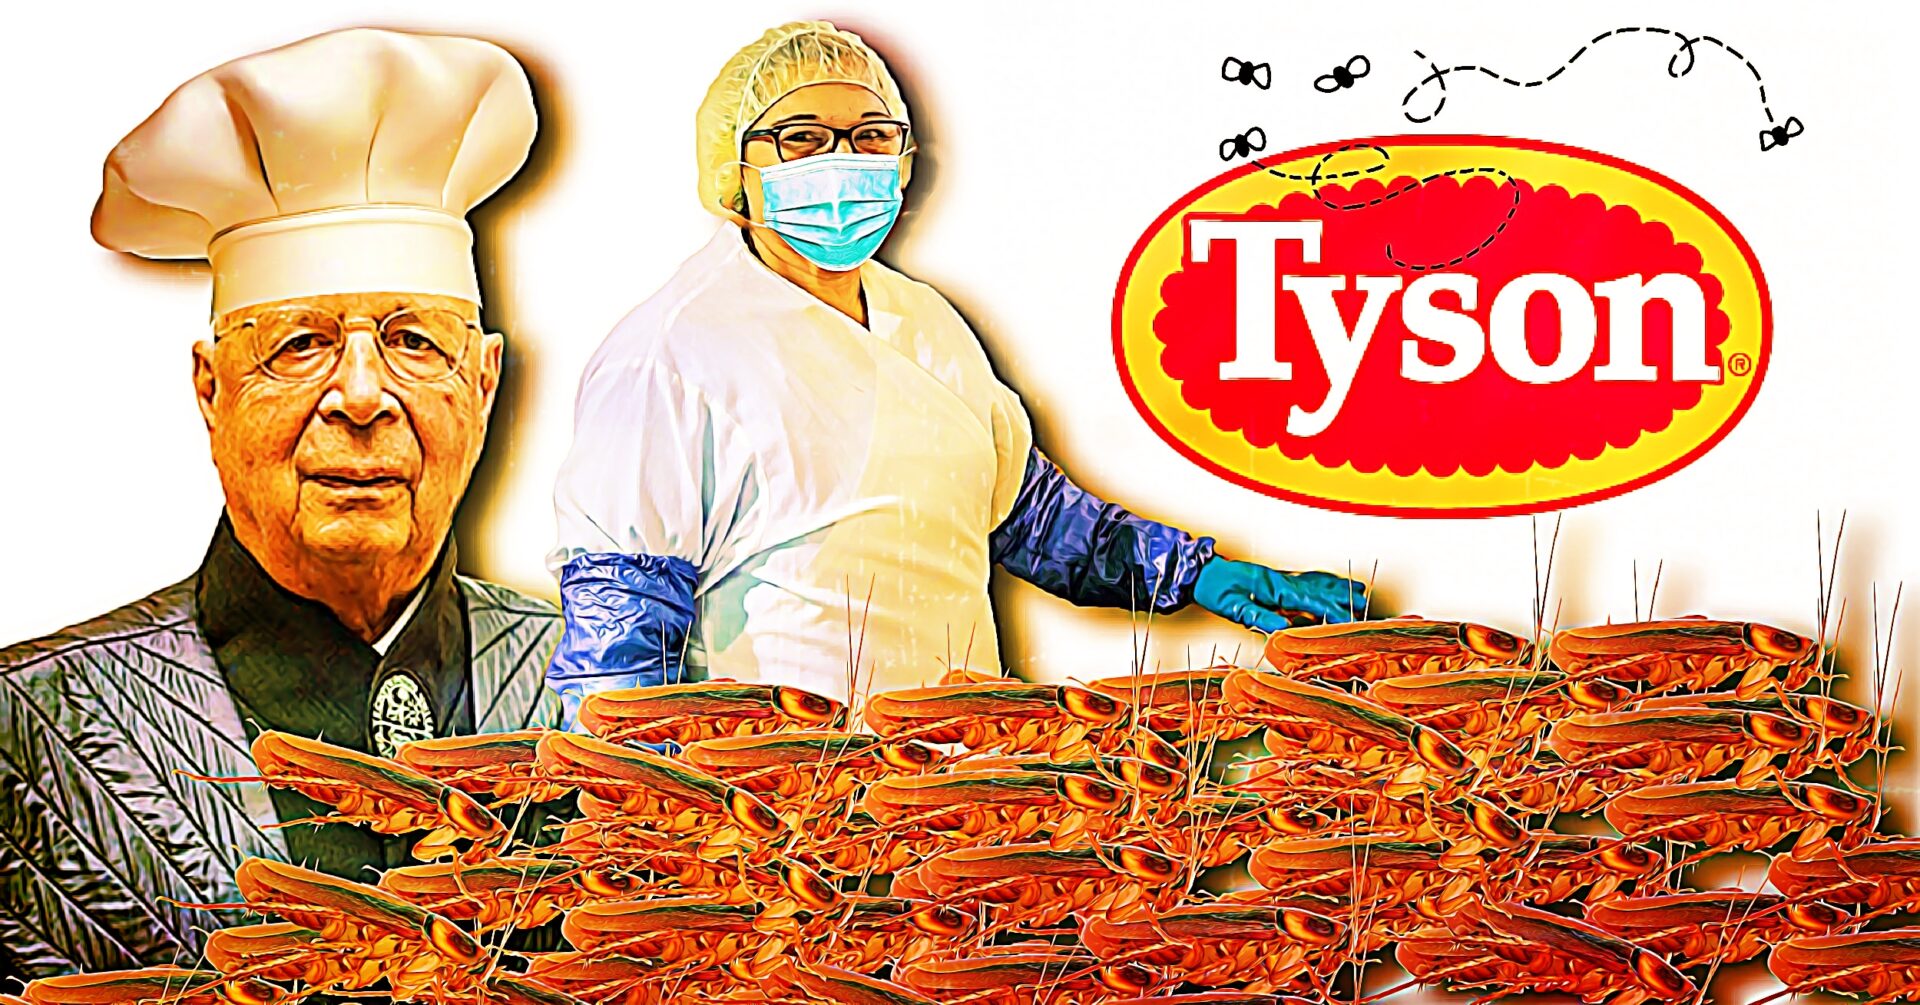 Tyson Foods teams up with the World Economic Forum to open an "insect